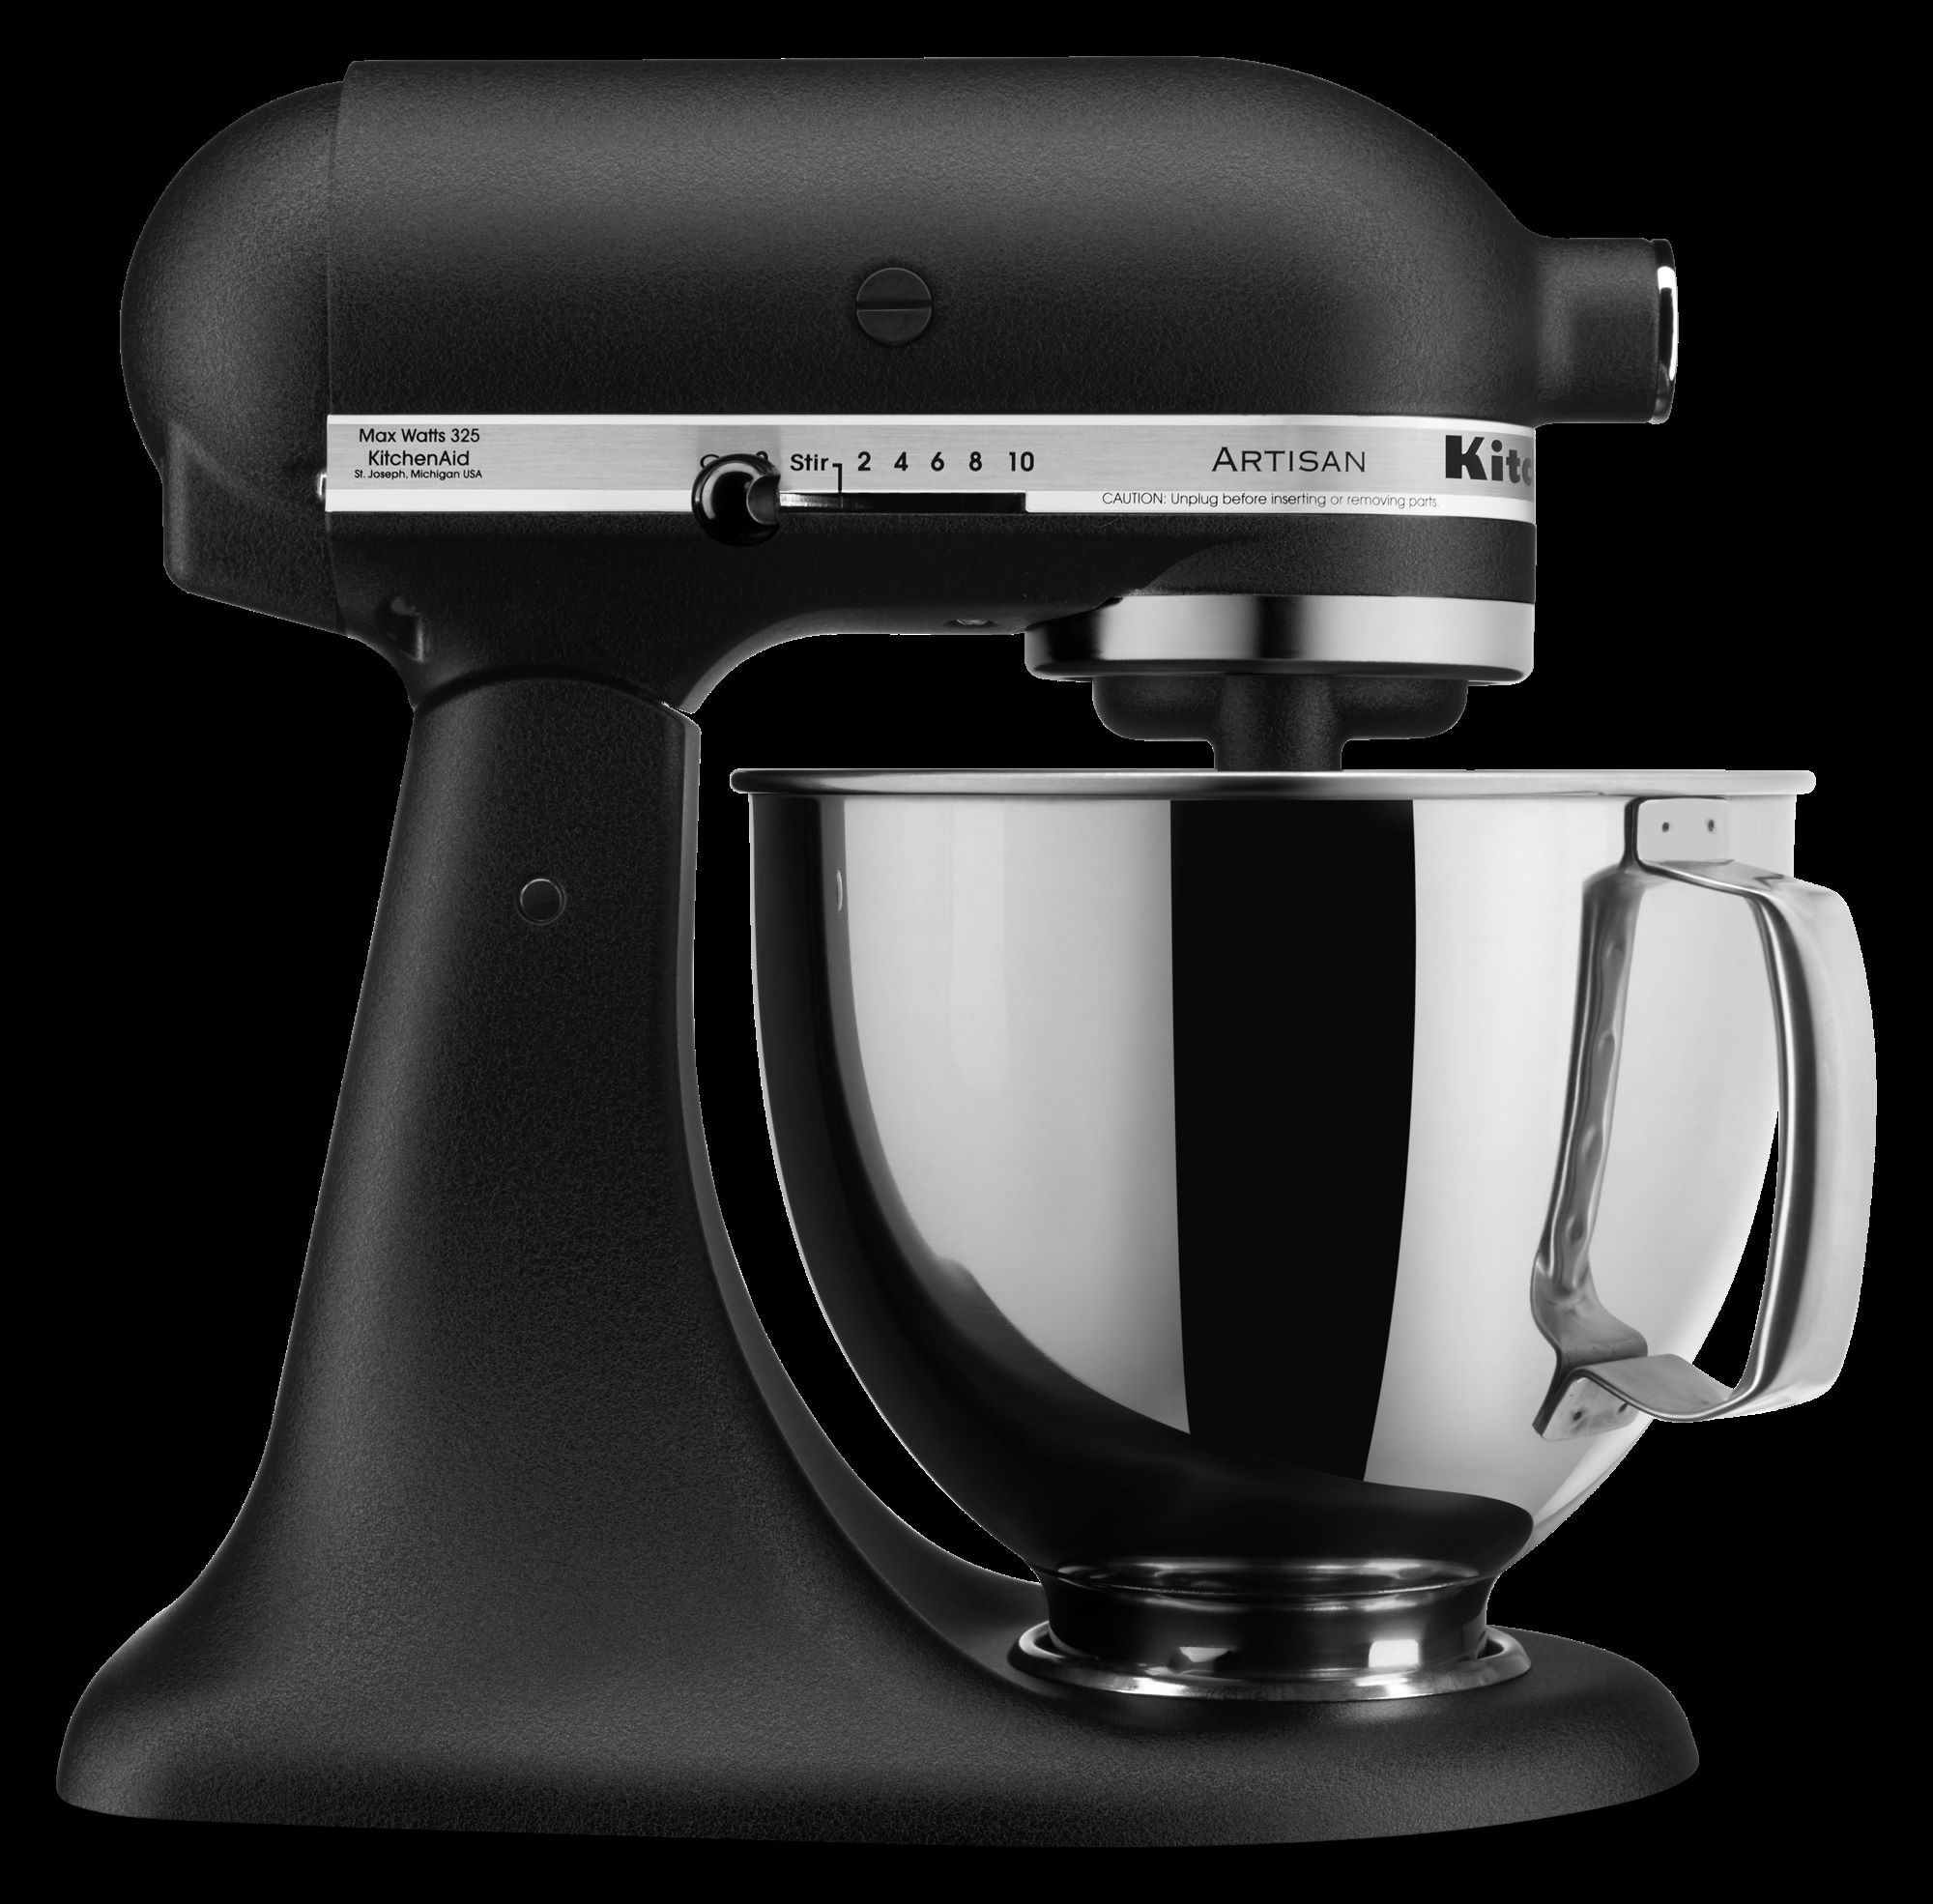 KitchenAid Artisan Series 5-Quart in Stand department Residential Black 10-Speed Mixer Mixers the Stand Imperial at